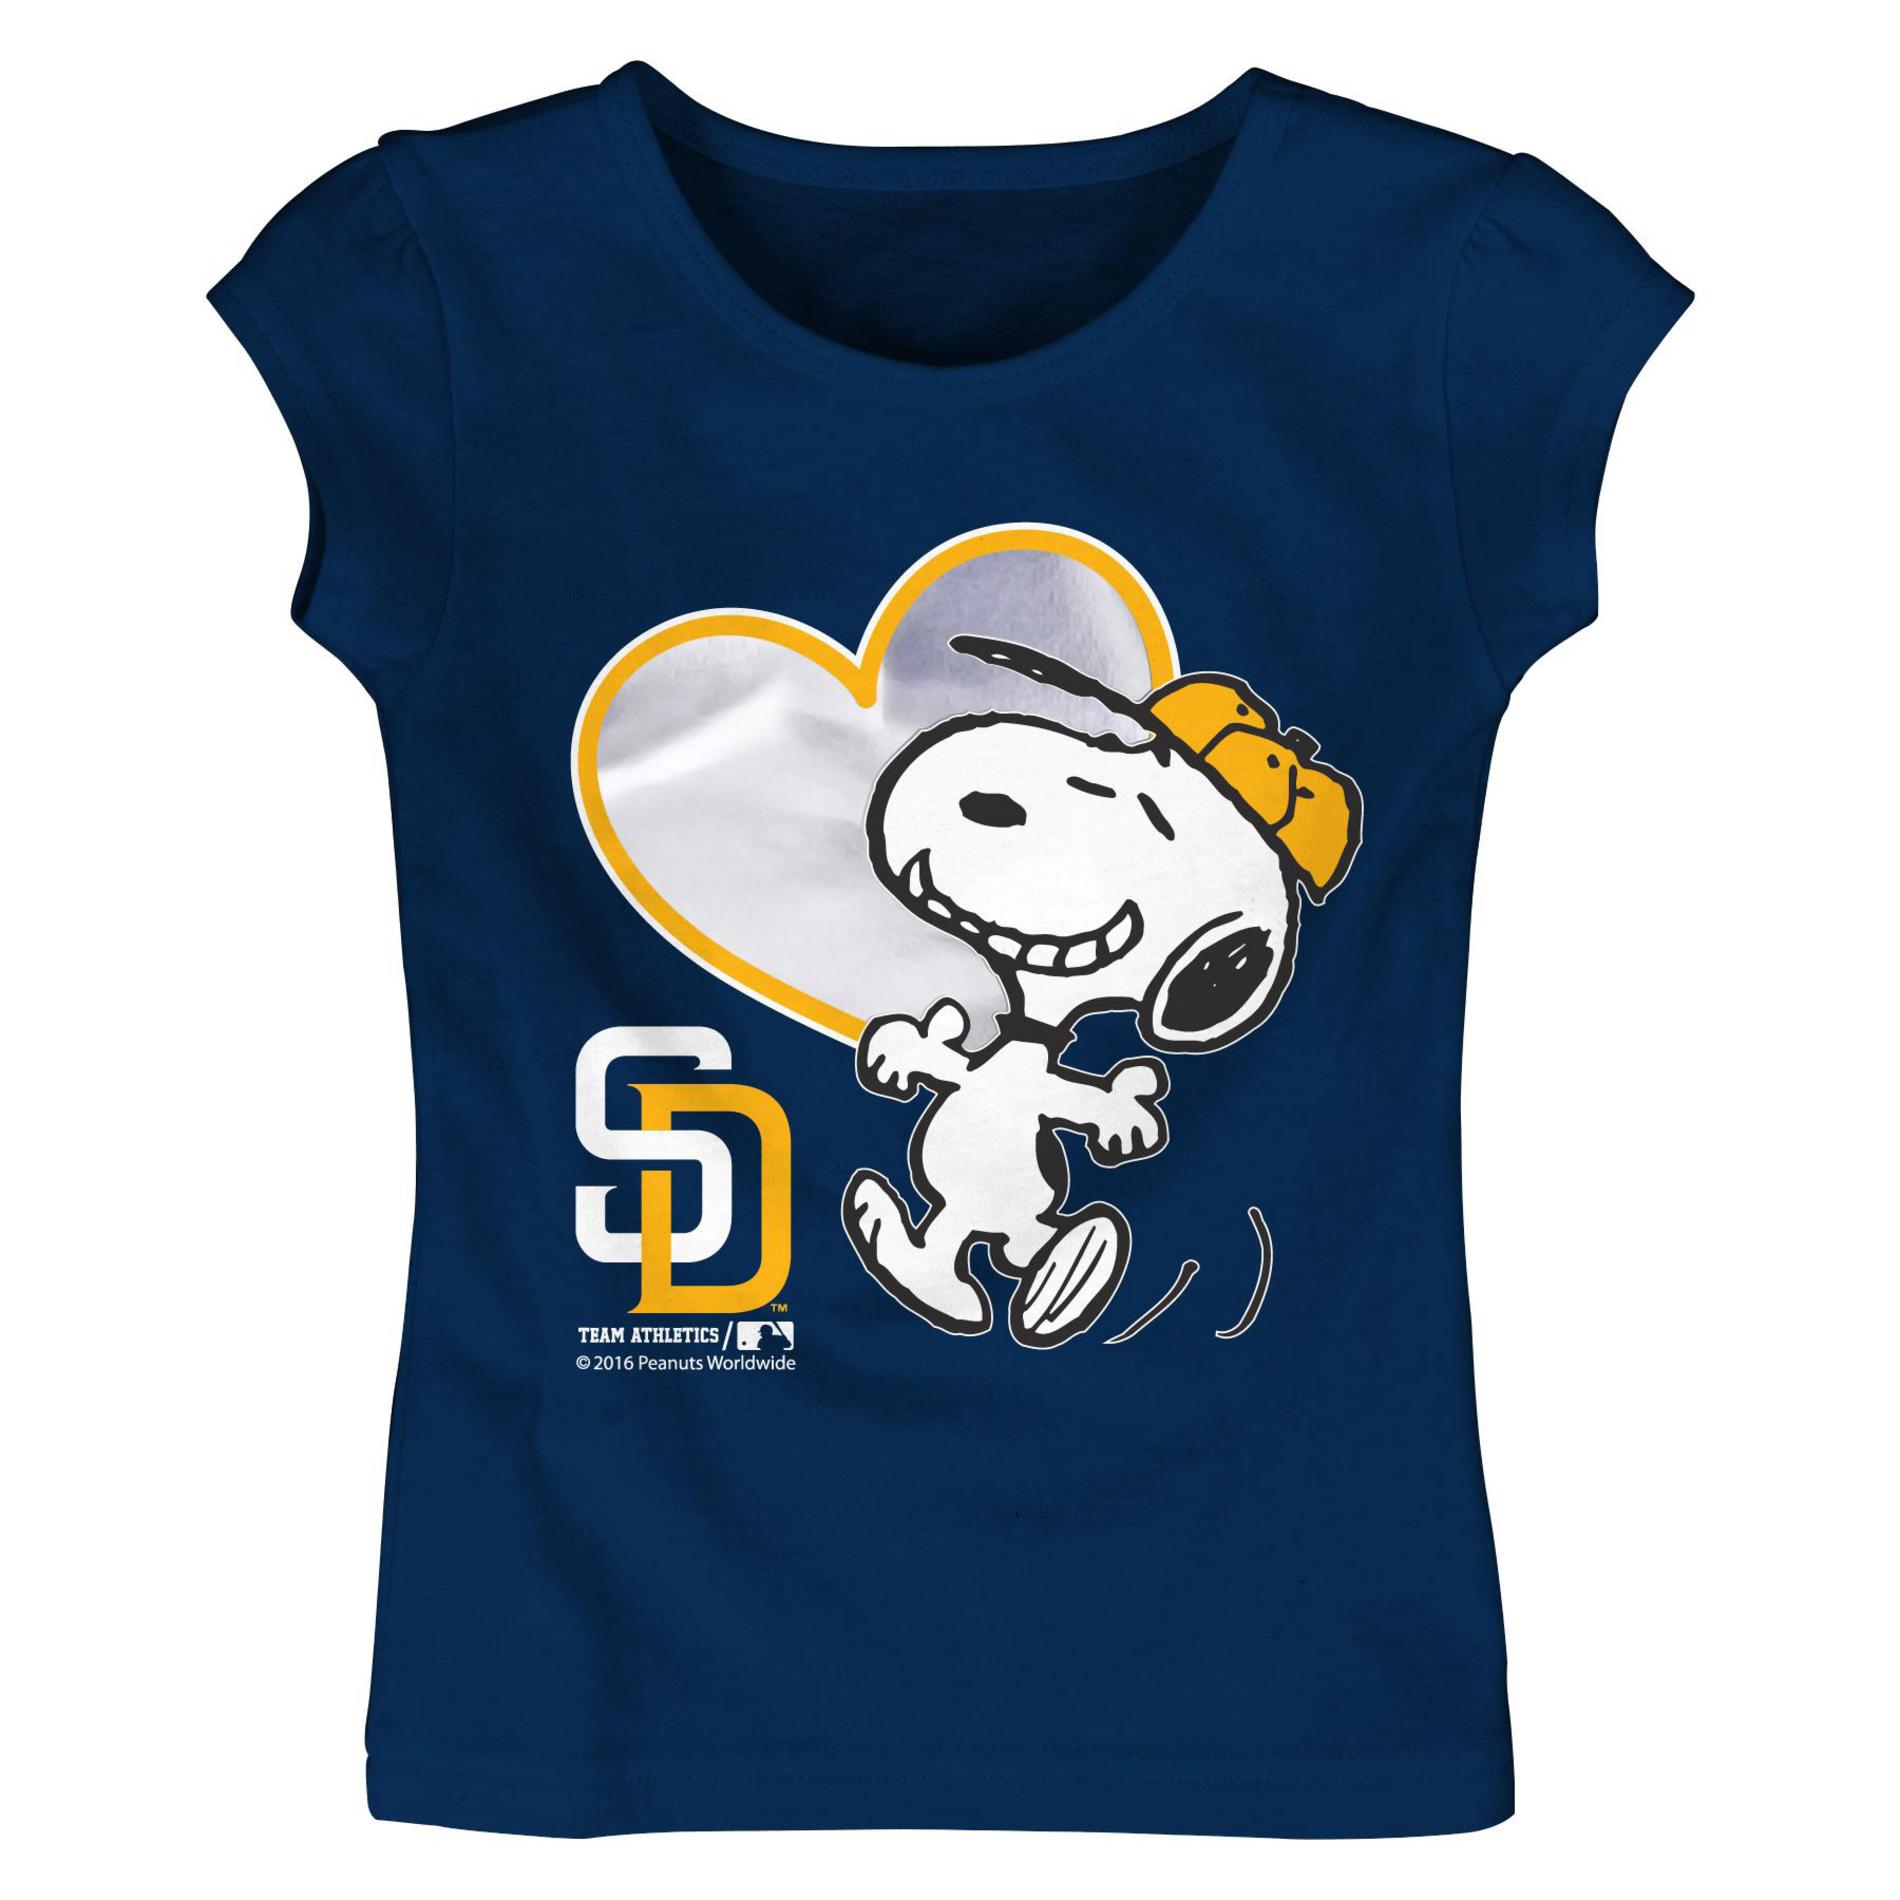 MLB Snoopy Toddler Girl's T-Shirt - Detroit Tigers